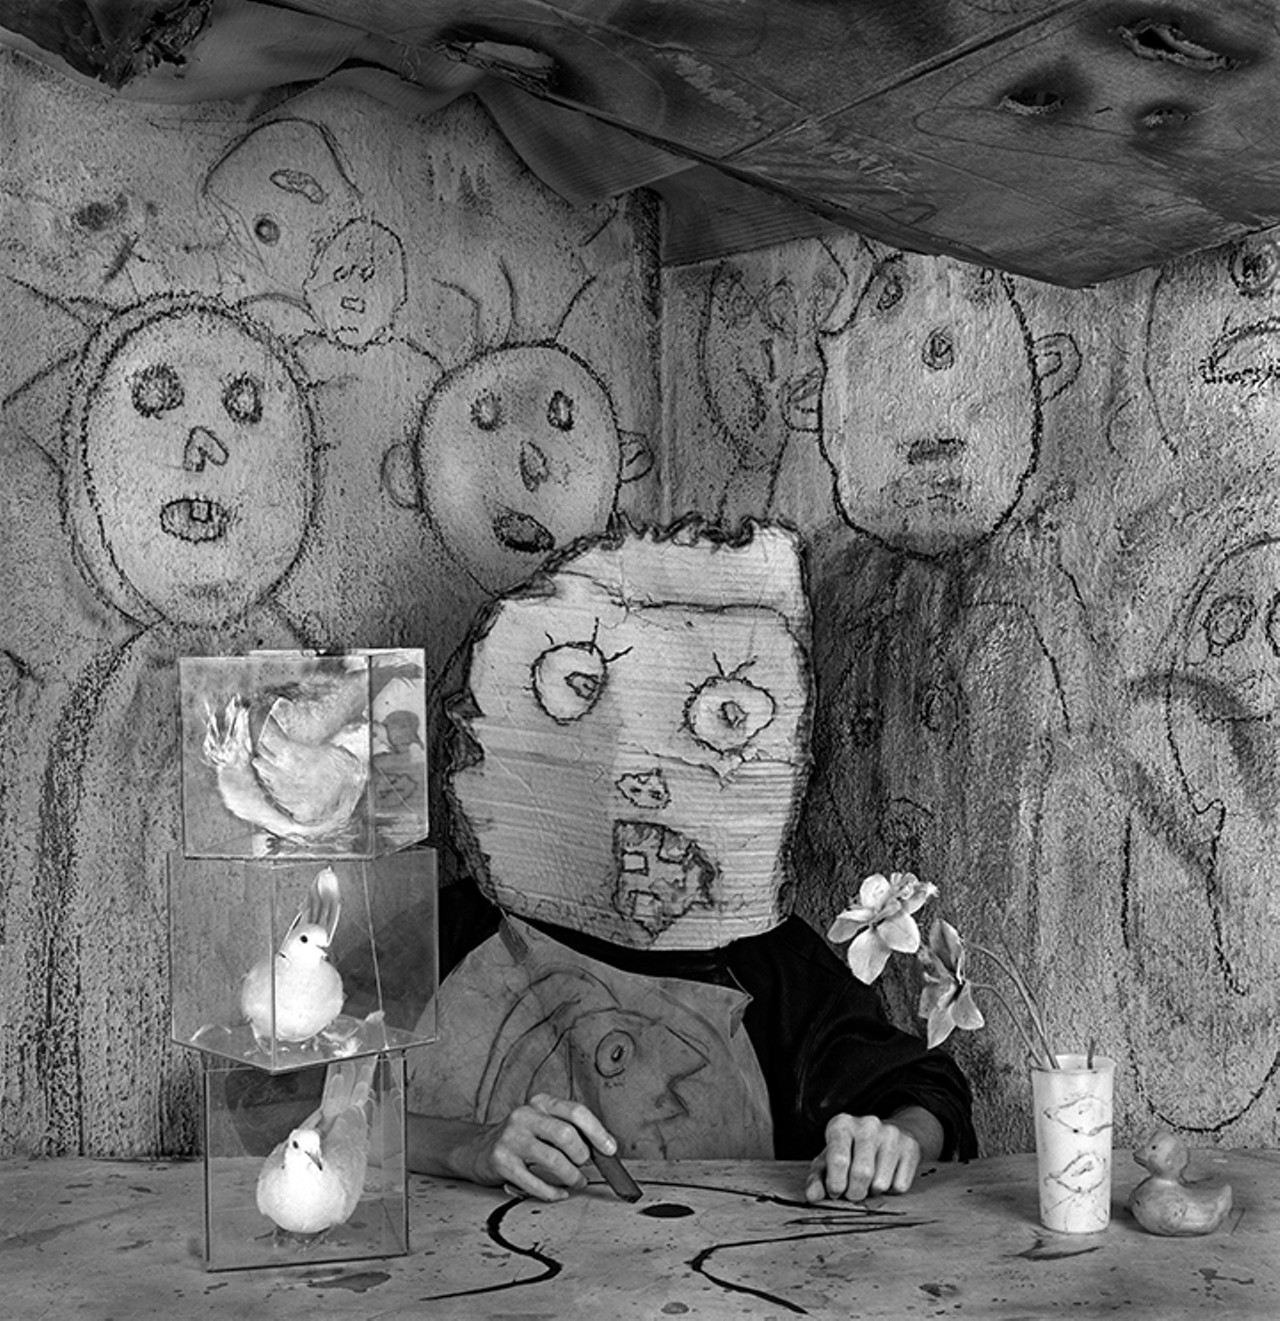 Friday and Saturday, Oct. 7-8Roger Ballen: In Retrospect opens at Snap Space (Friday) and the Southeast Museum of Photography (Saturday)"Artist" by Roger Ballen, 2013